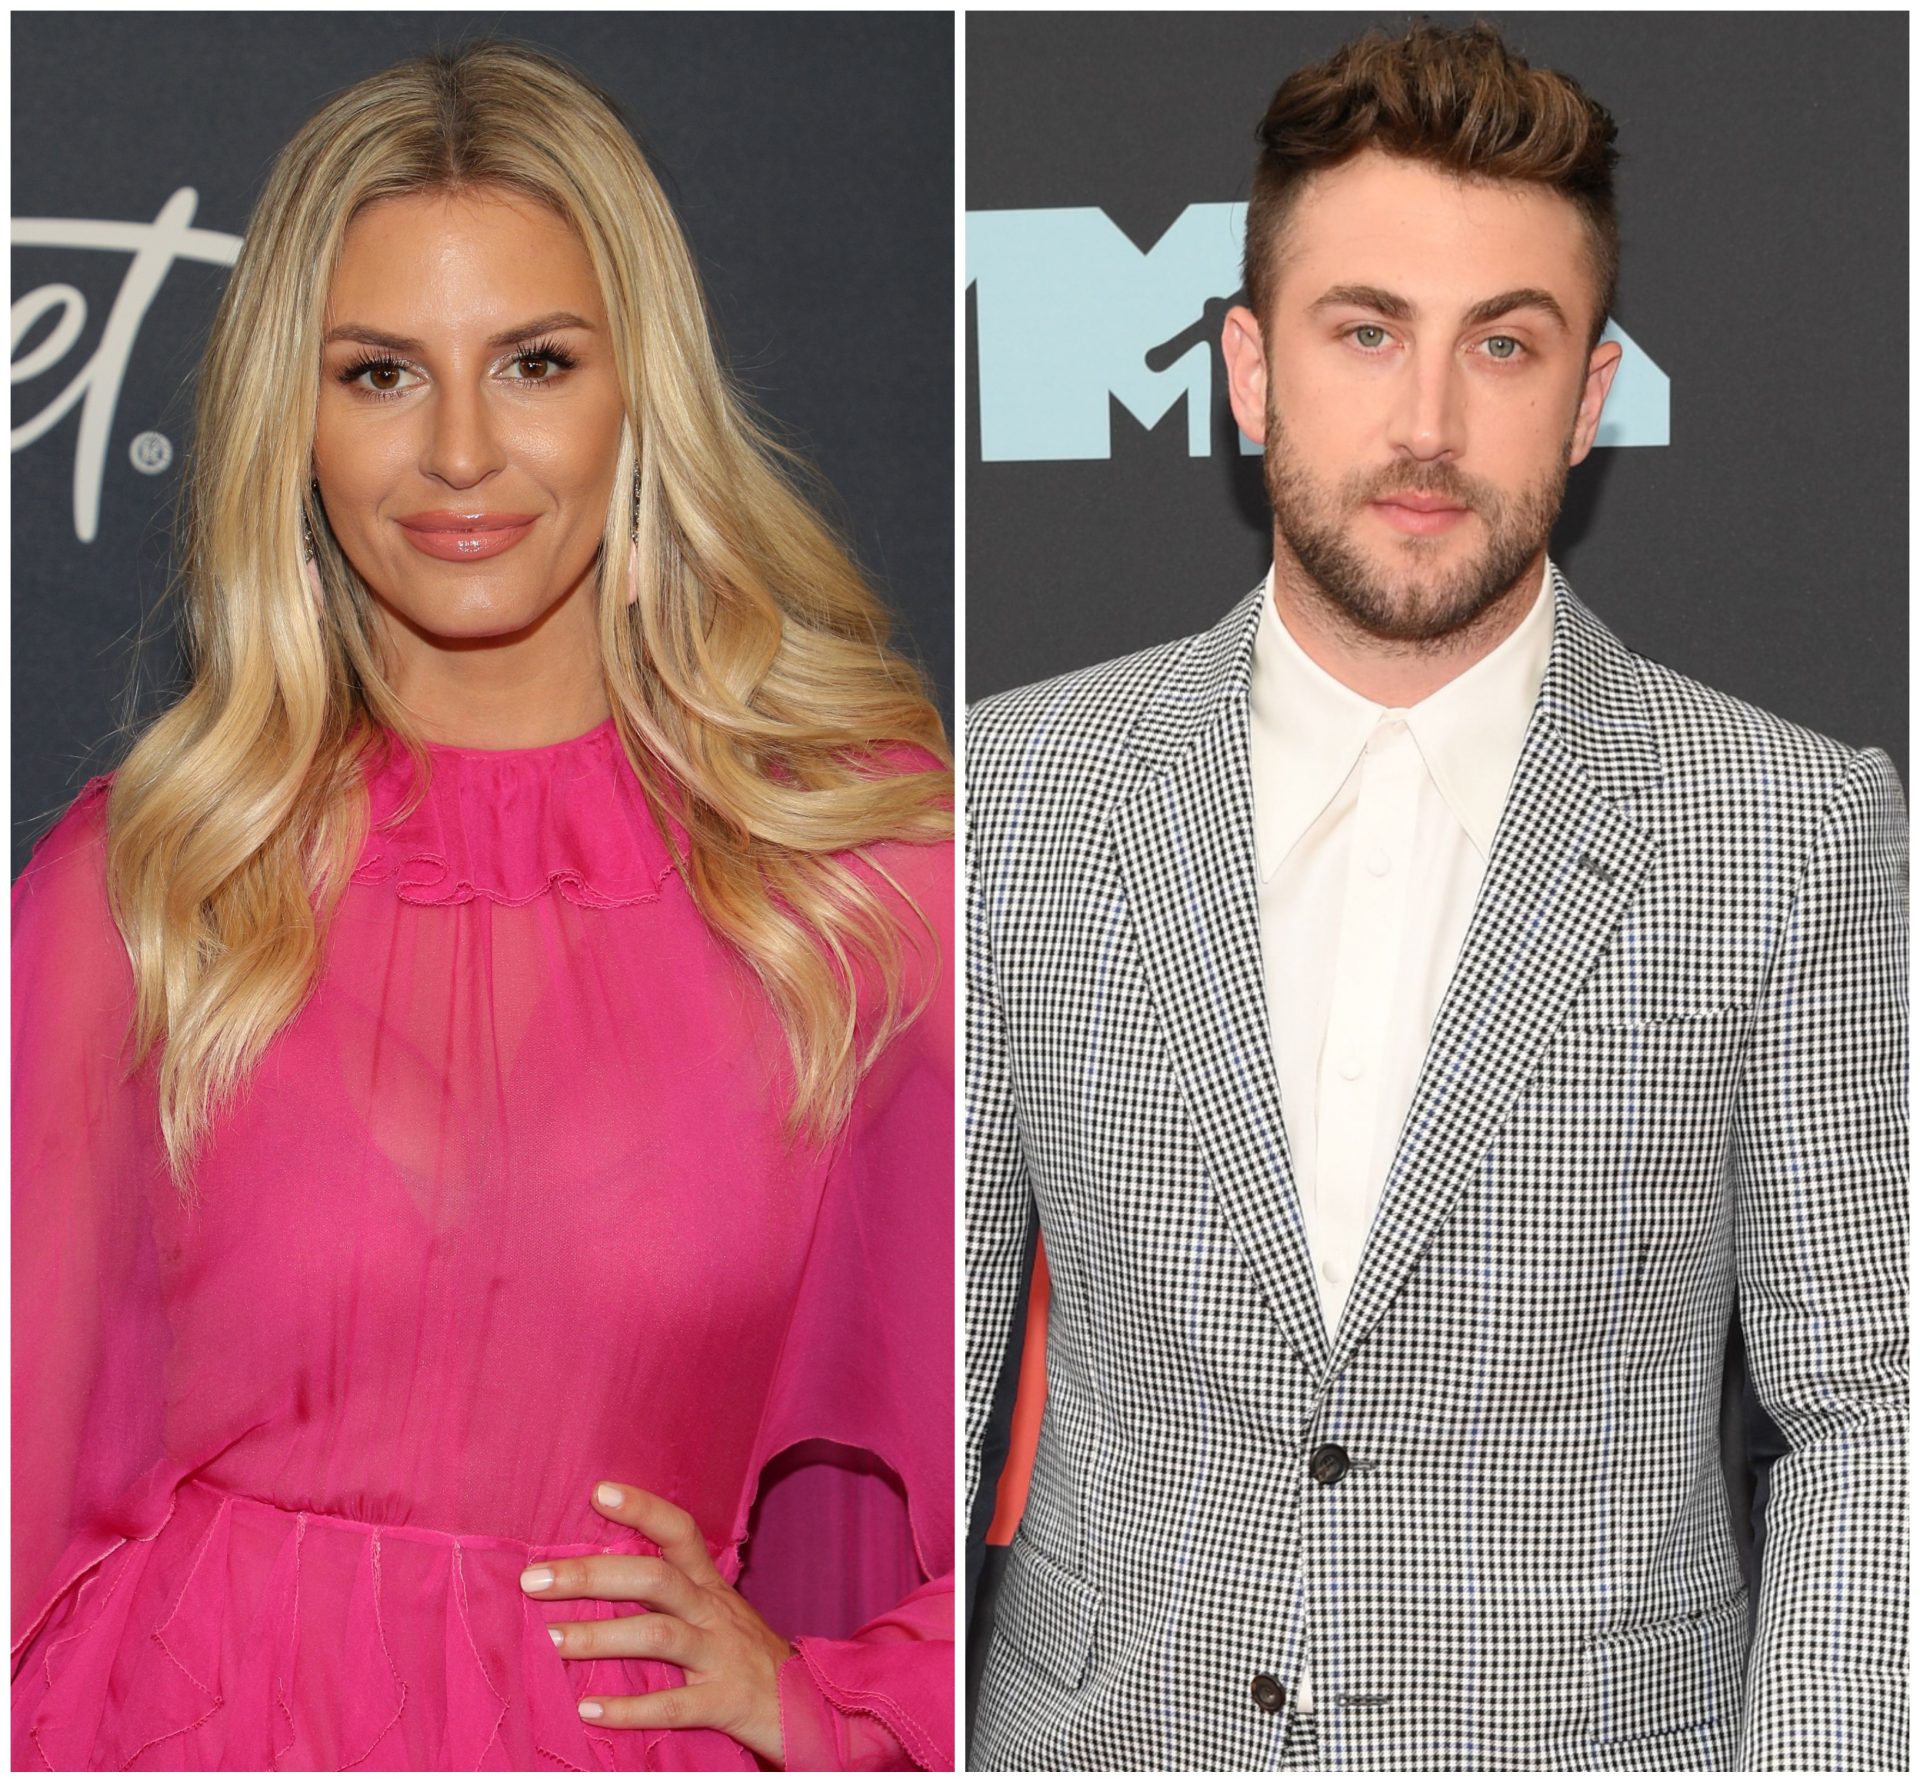 Morgan Stewart and Jordan McGraw Are Engaged: See Her Ring